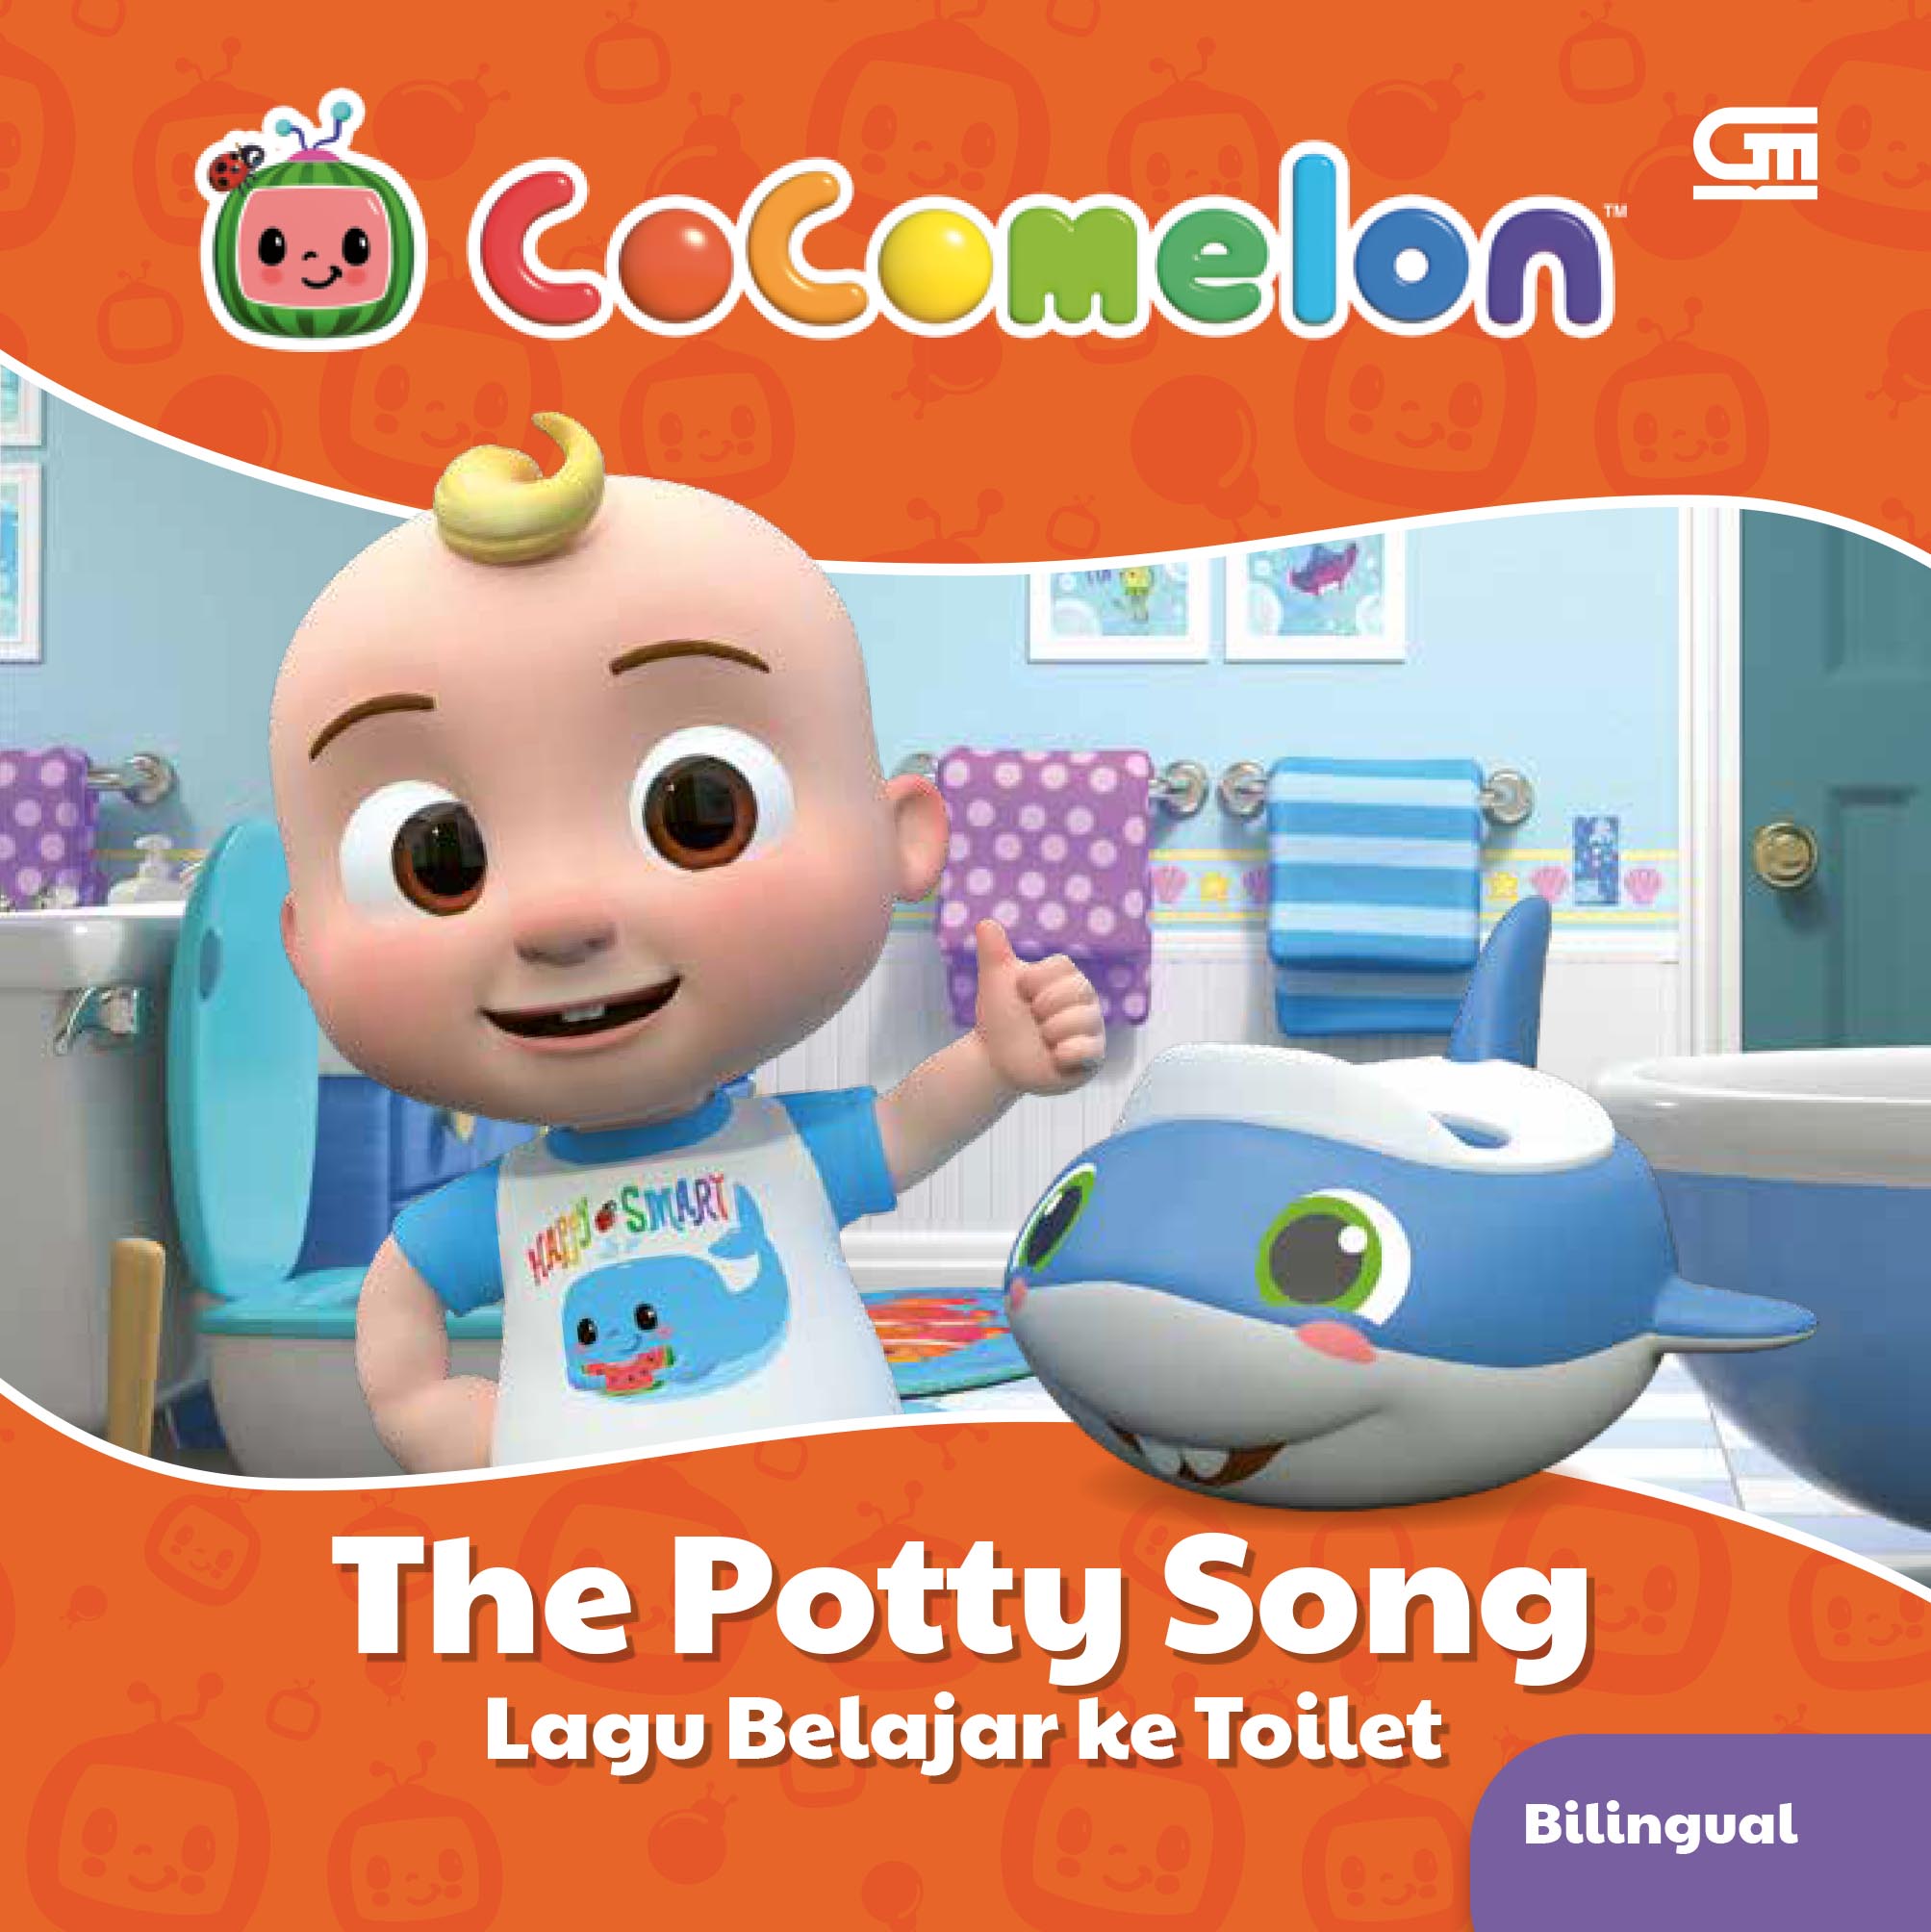 Cocomelon: The Potty Song